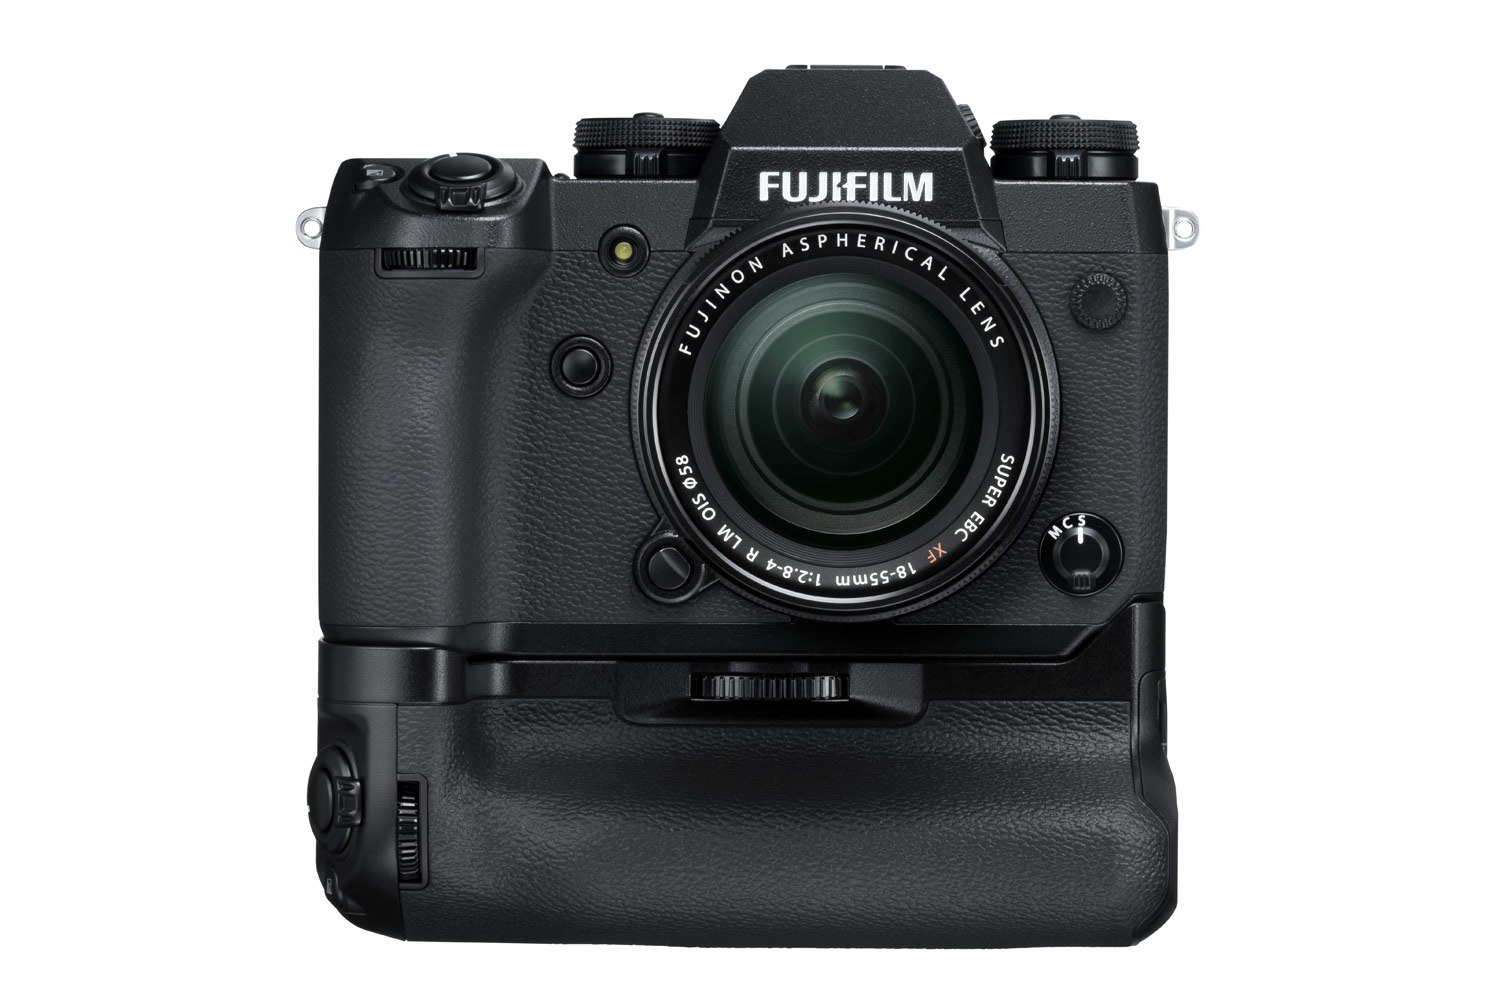 XH-1 is Fujifilm's First Camera with 5-Axis Stabilization | Digital Trends